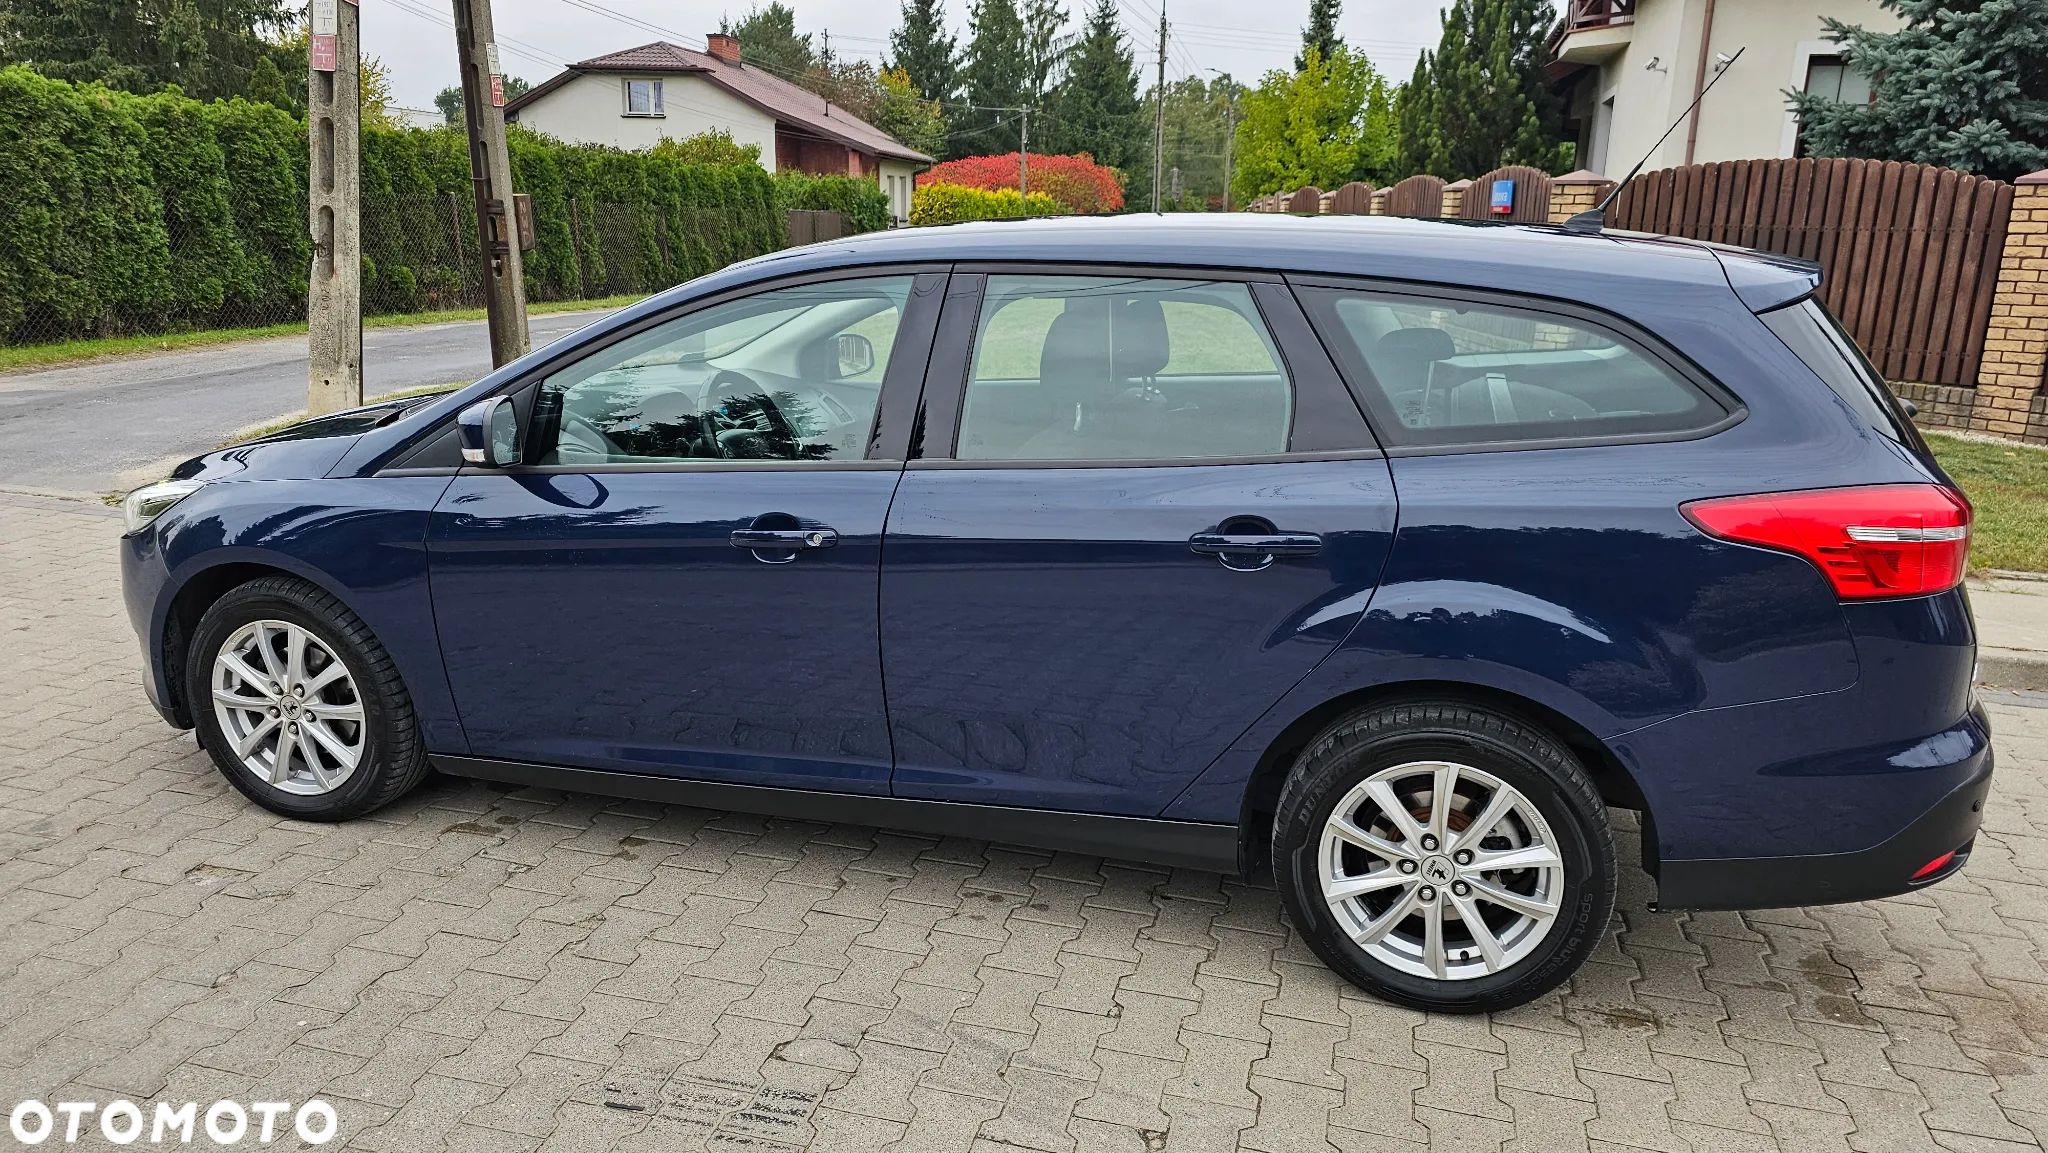 Ford Focus 1.6 TDCi Gold X (Trend) - 35